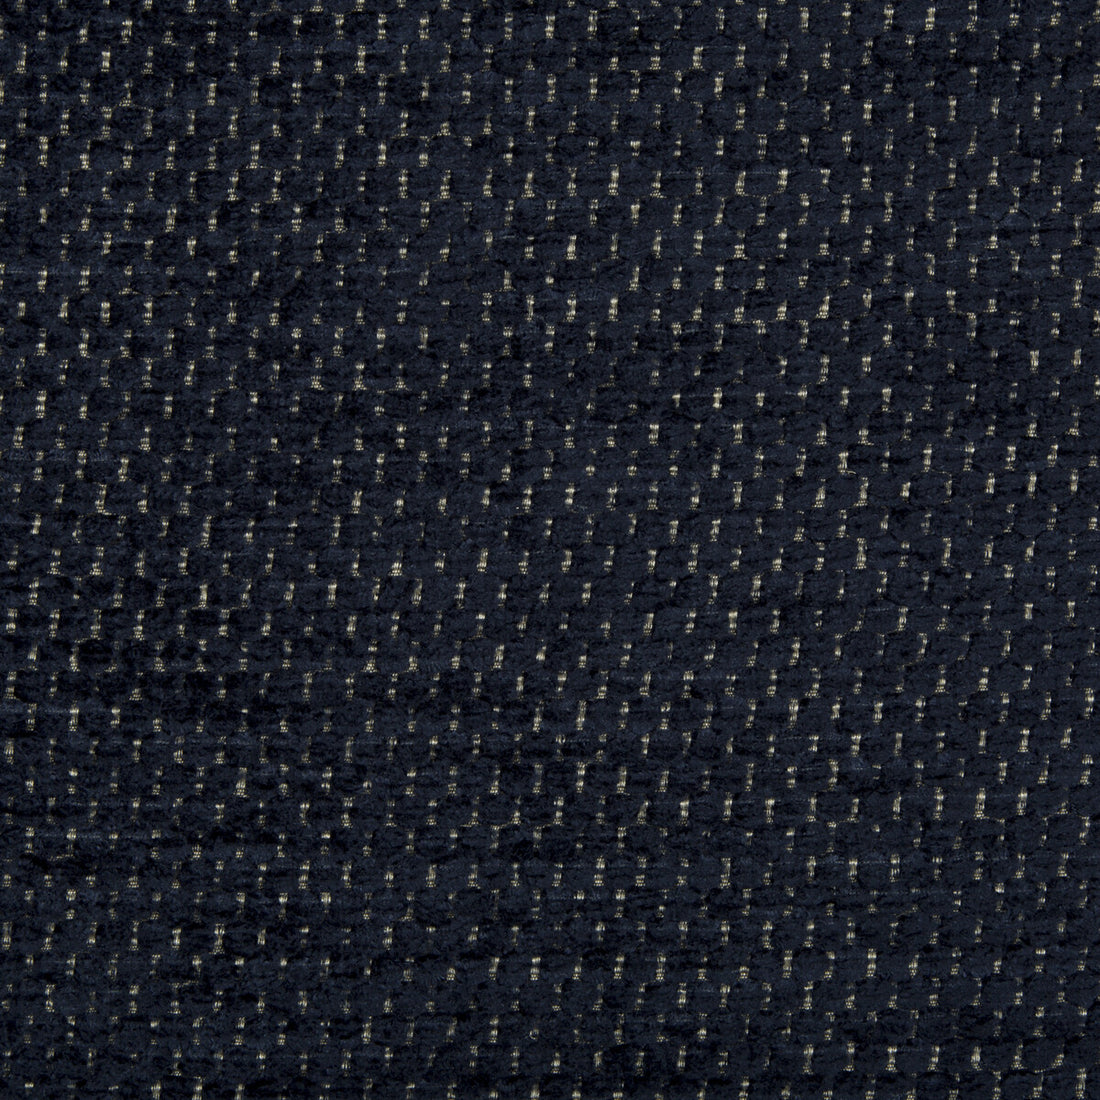 Lonsdale fabric in navy color - pattern 2016125.50.0 - by Lee Jofa in the Furness Weaves collection